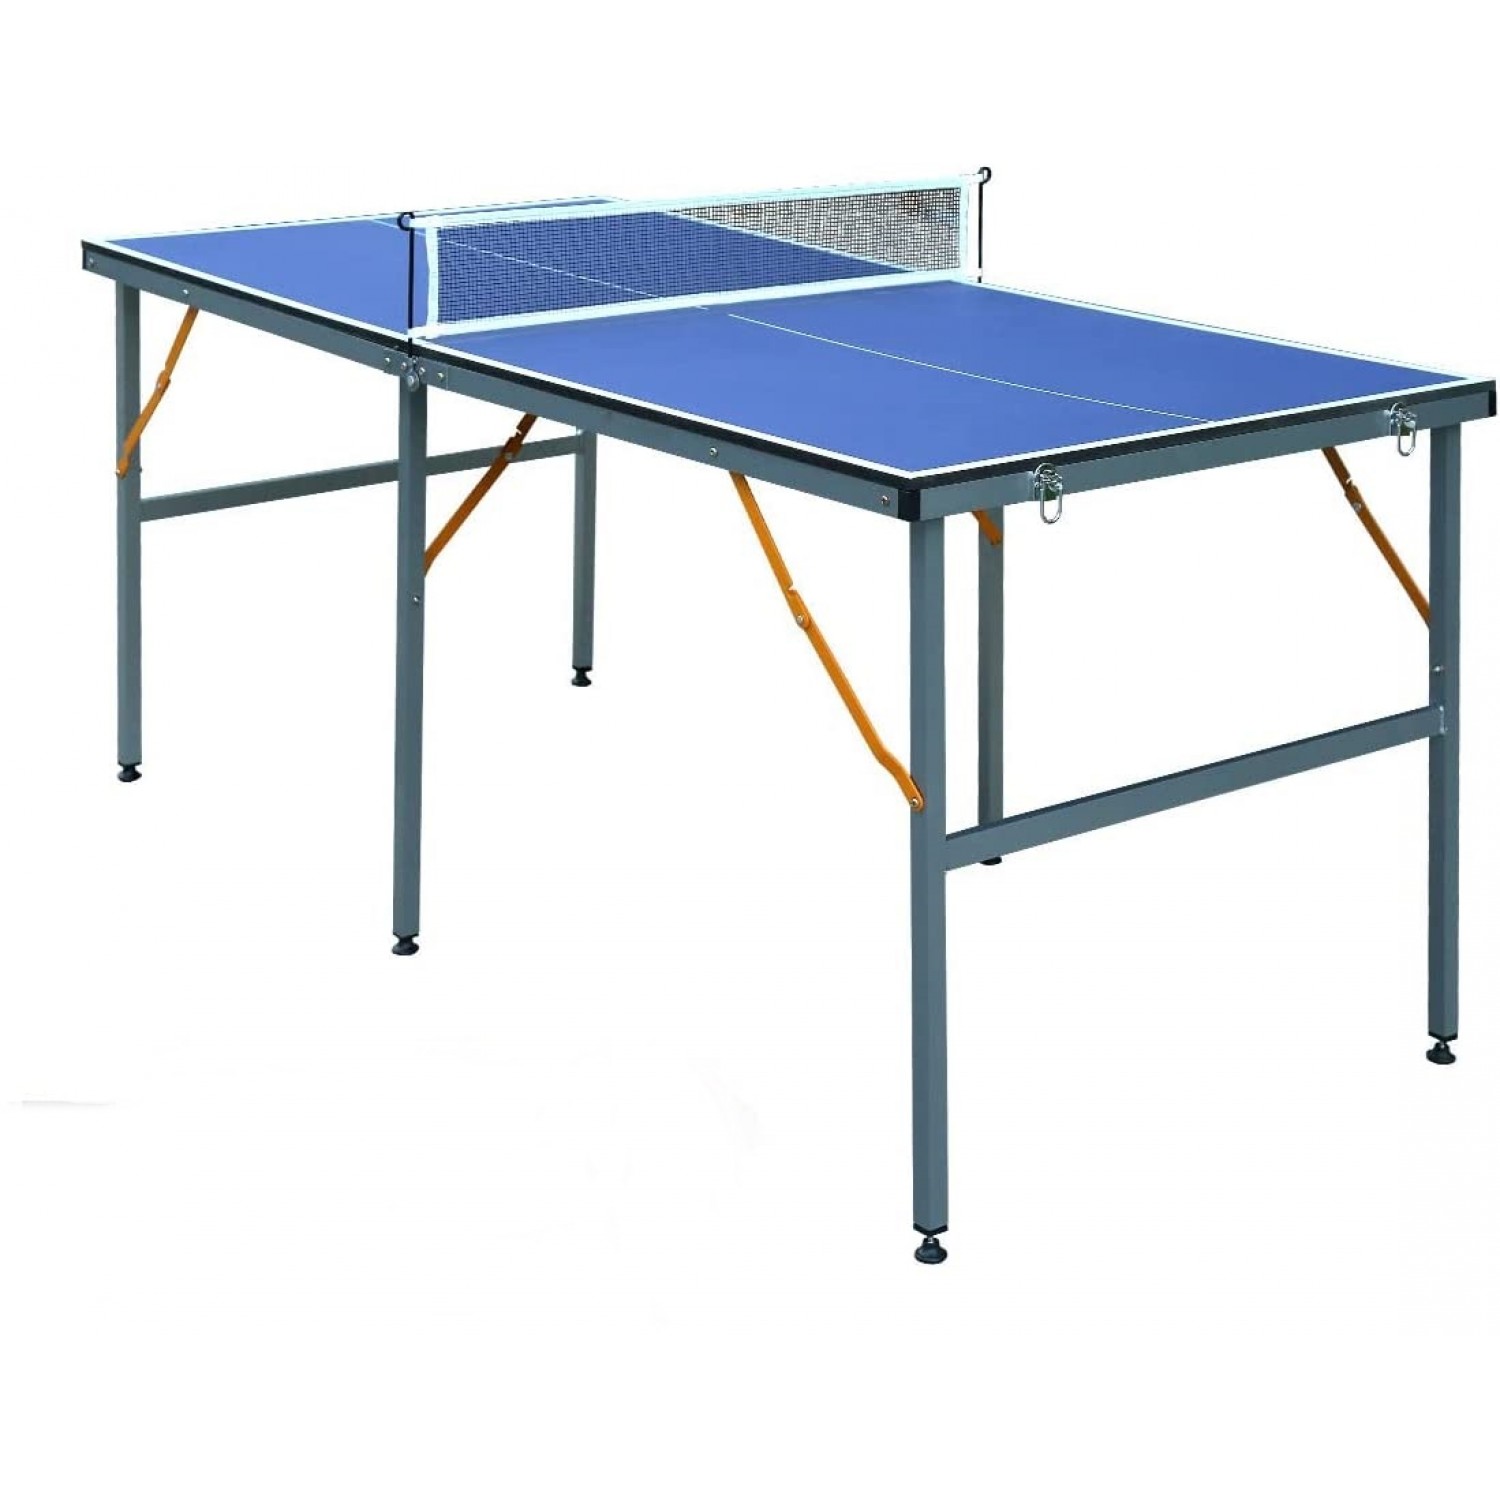 Helix Portable Table Tennis Table